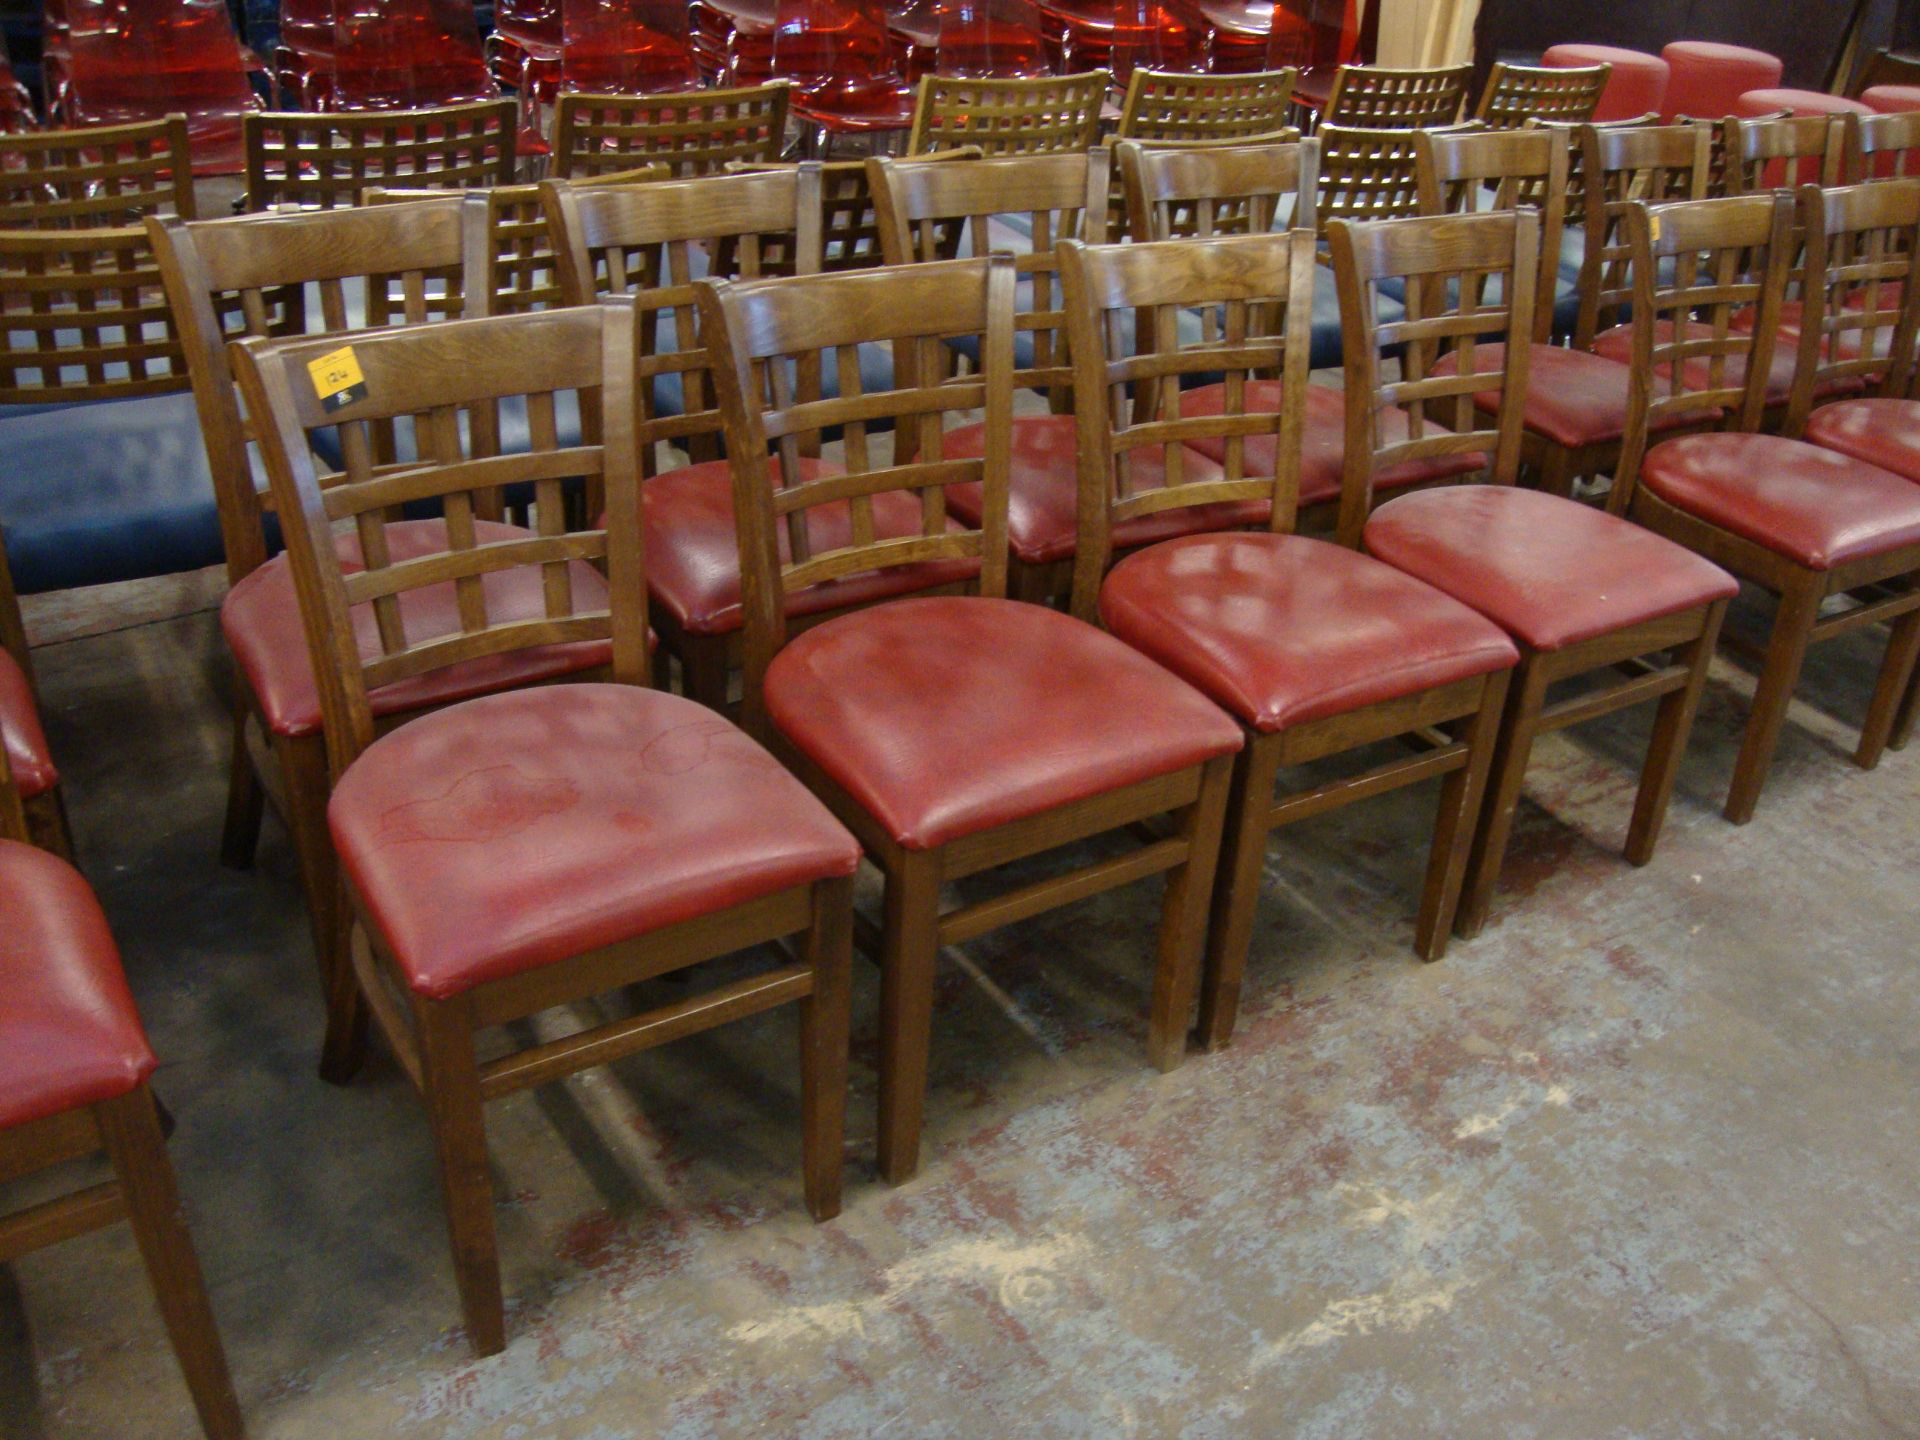 8 off wooden chairs with red upholstered bases. NB lots 121 – 129 consist of different quantities of